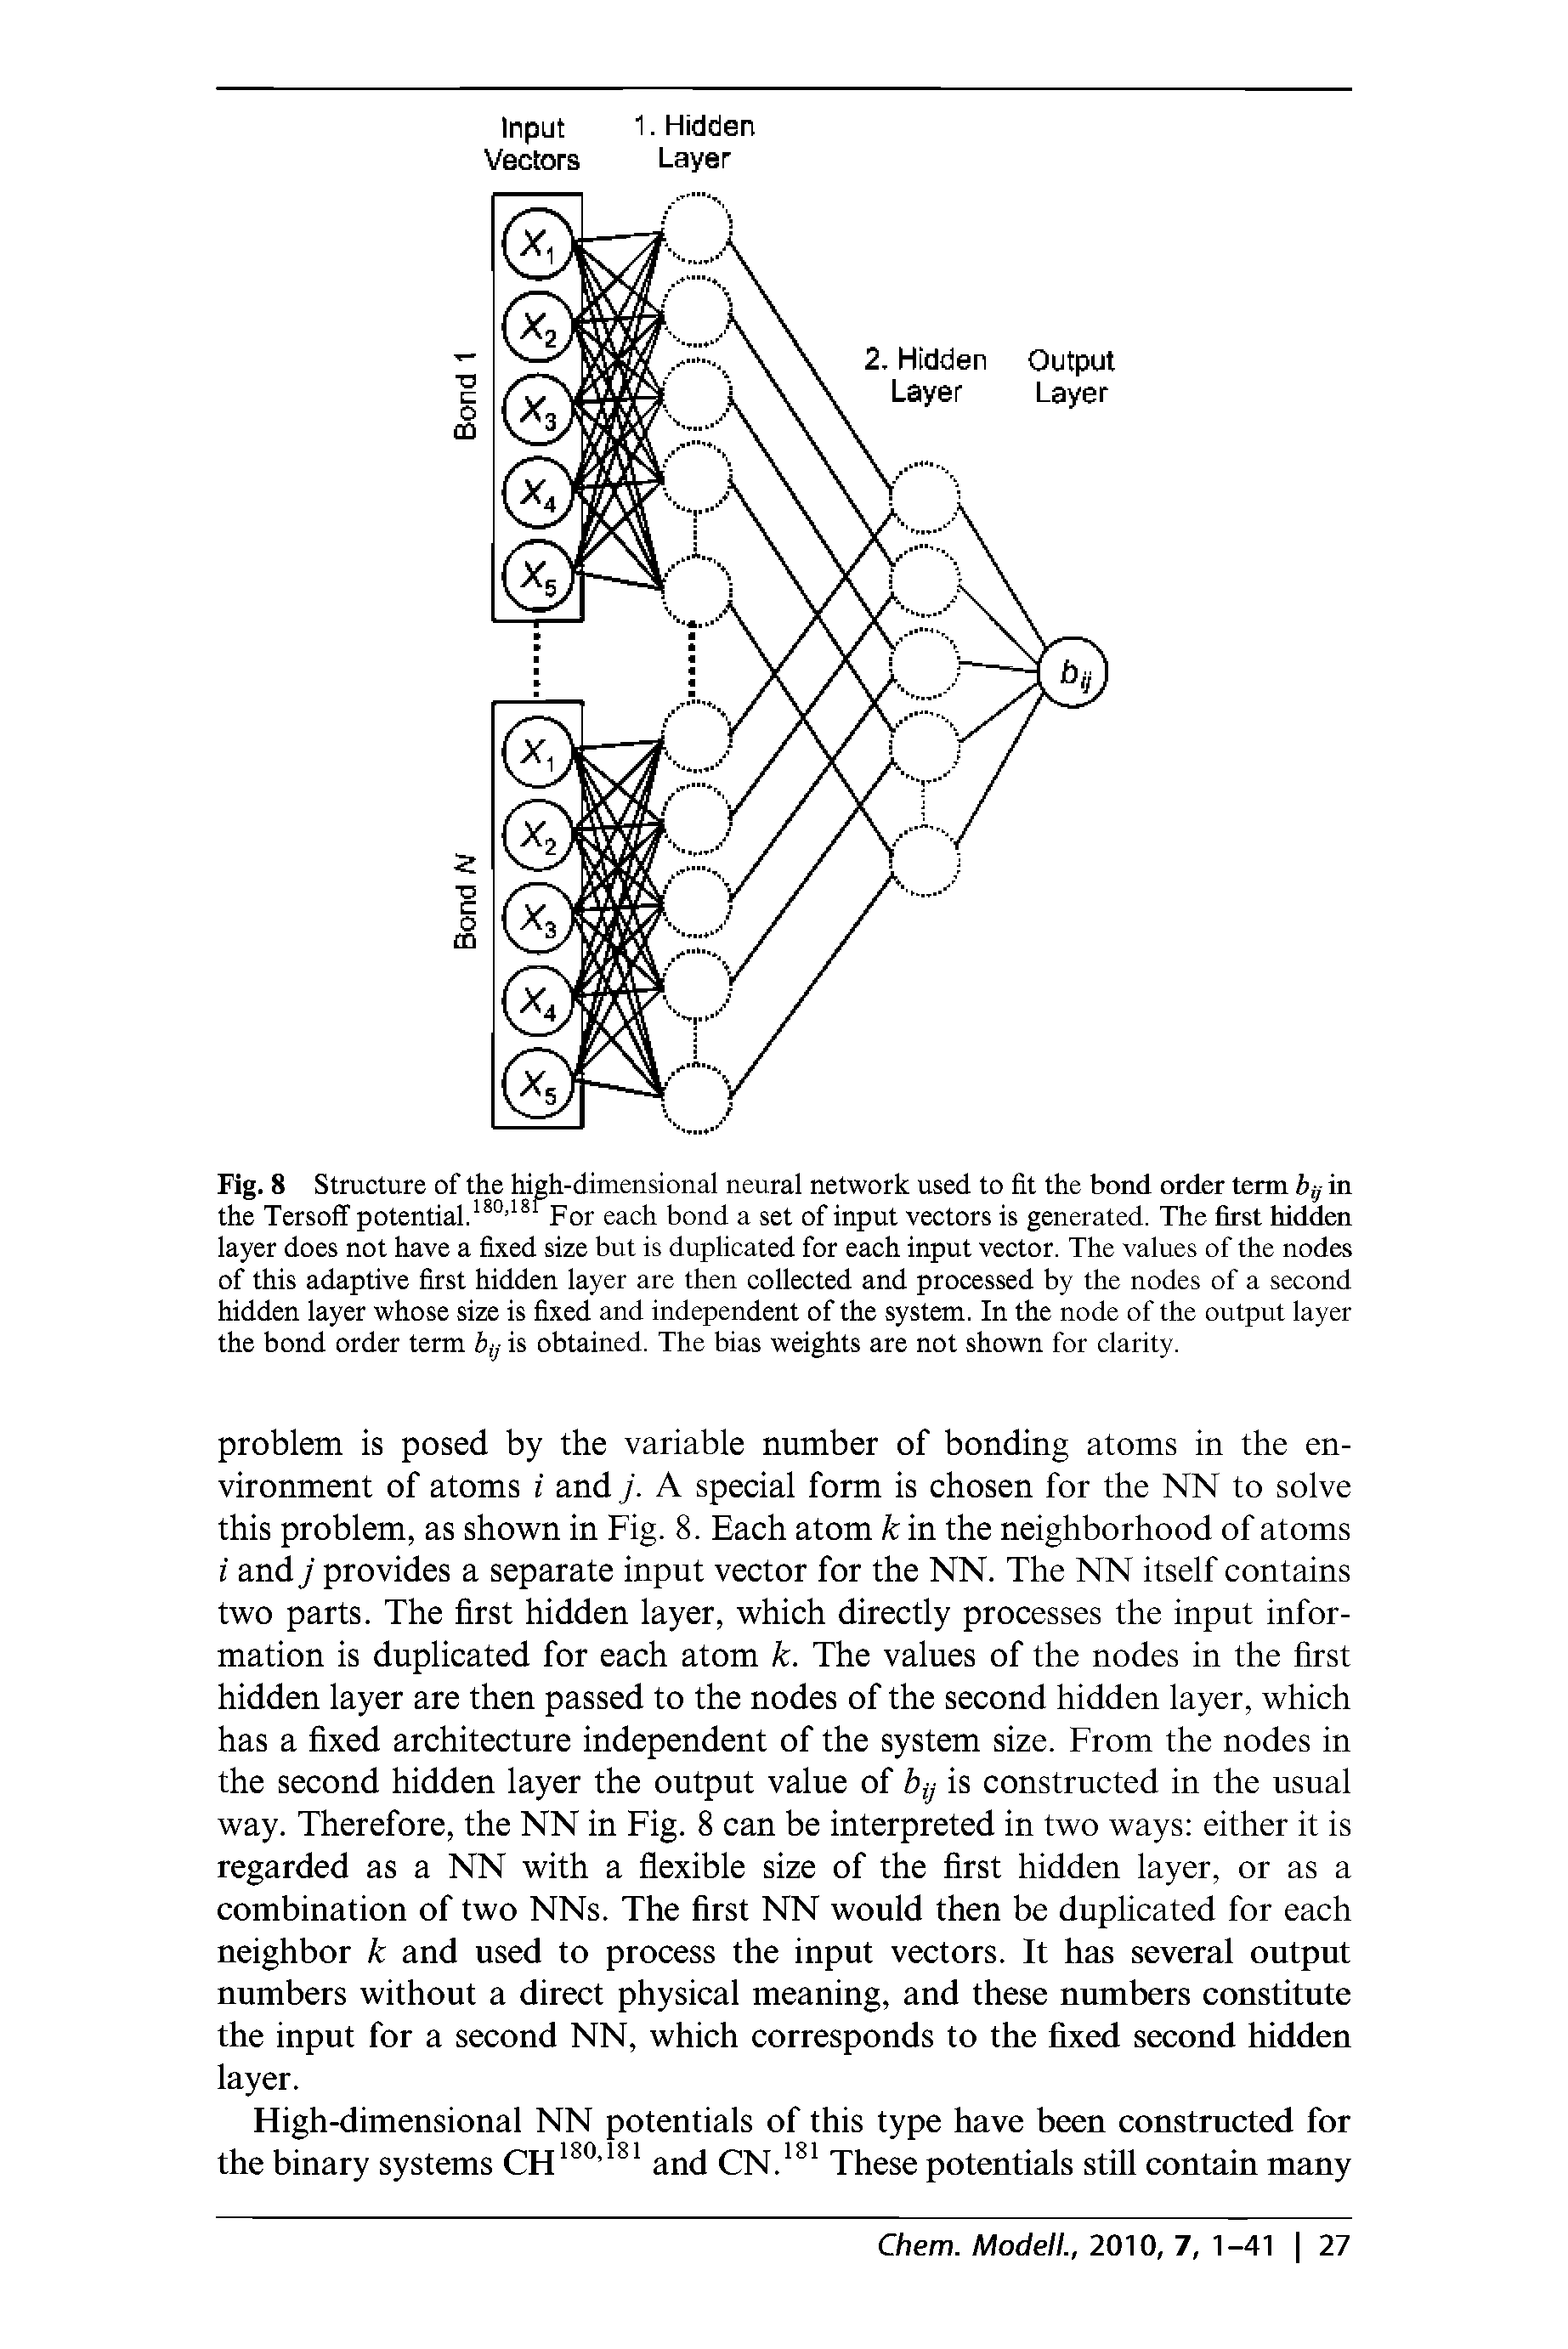 Fig. 8 Structure of the high-dimensional neural network used to fit the bond order term by in the Tersoff potential. For each bond a set of input vectors is generated. The first hidden layer does not have a fixed size but is duplicated for each input vector. The values of the nodes of this adaptive first hidden layer are then collected and processed by the nodes of a second hidden layer whose size is fixed and independent of the system. In the node of the output layer the bond order term by is obtained. The bias weights are not shown for clarity.